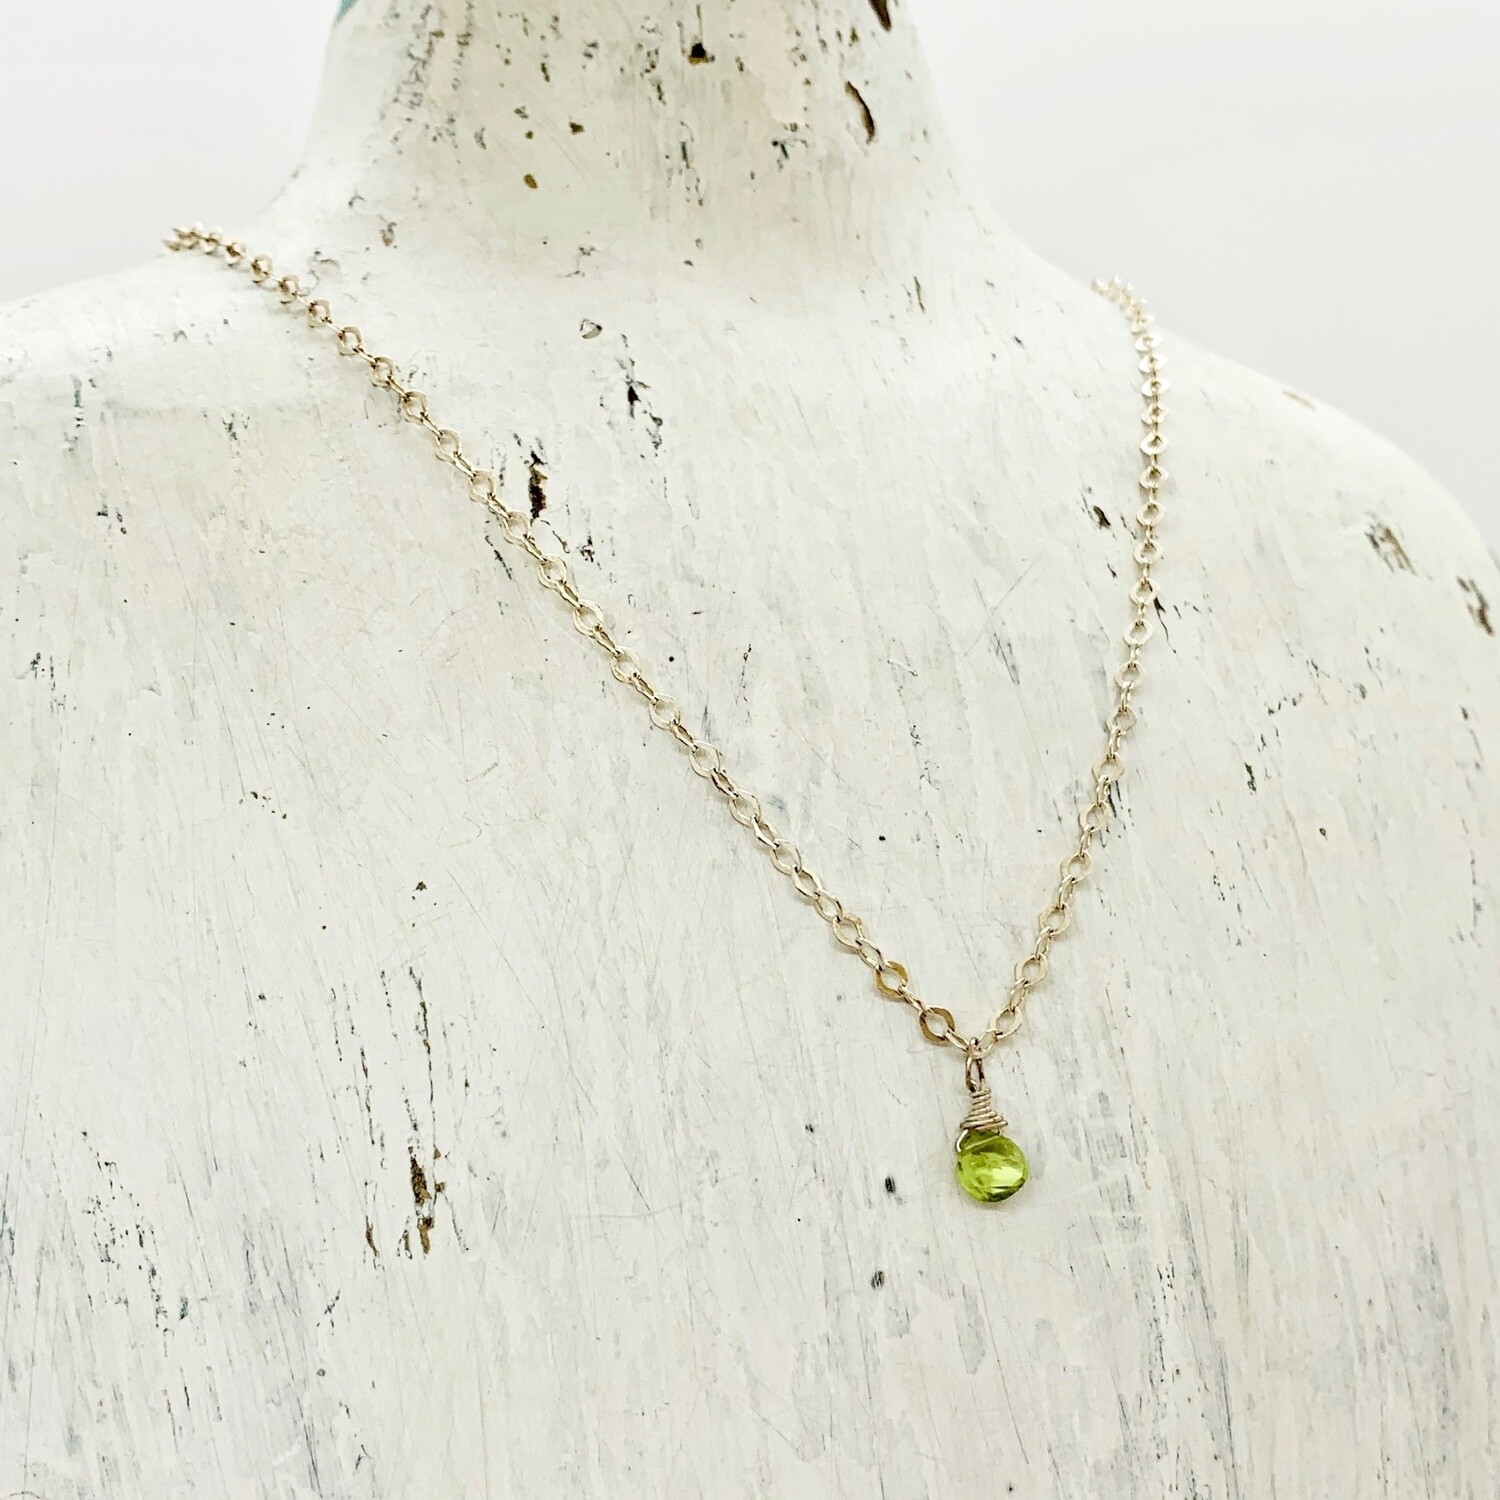 Handmade Silver Necklace with Peridot Briolette